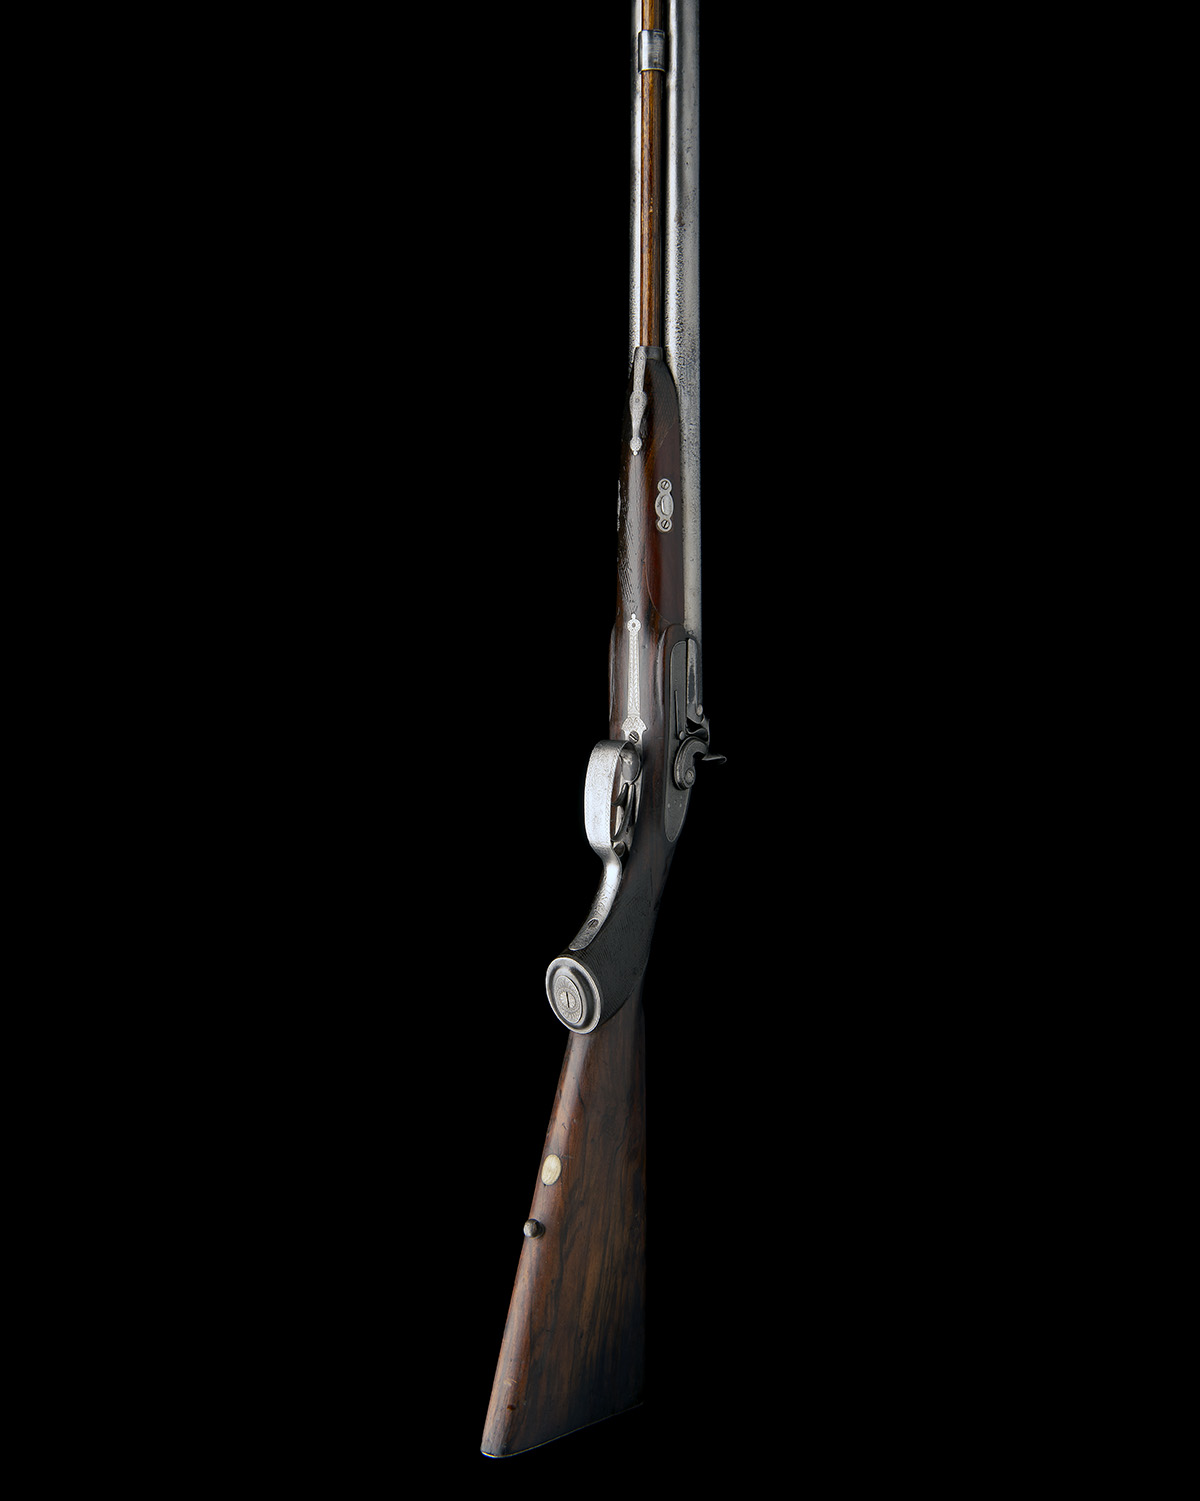 E.M. REILLY & CO, LONDON A SUBSTANTIAL 12-BORE/.600 PERCUSSION CAPE-RIFLE FOR RENOVATION, serial no. - Image 5 of 8